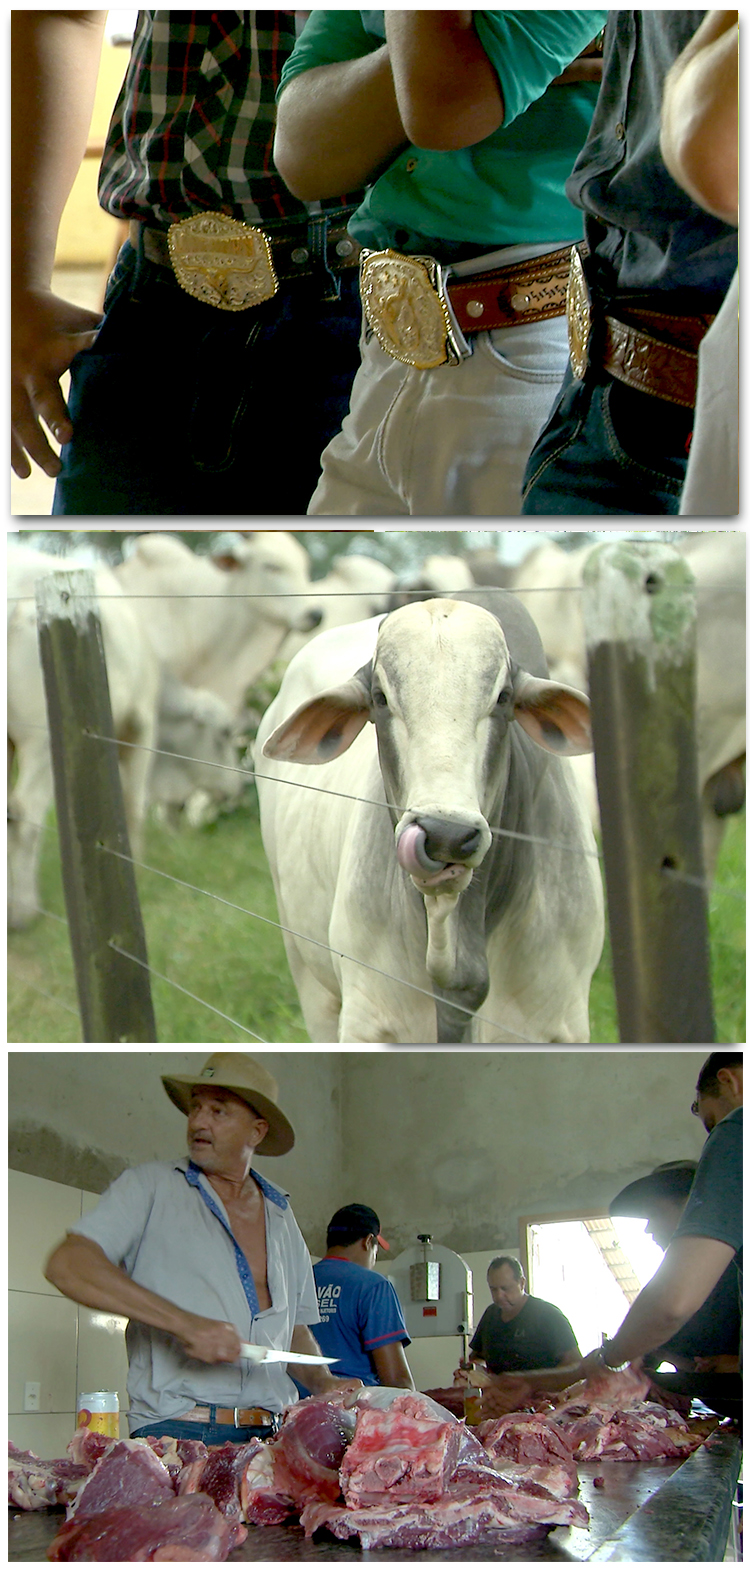 Many people who live in Novo Progresso are involved in the cattle industry.